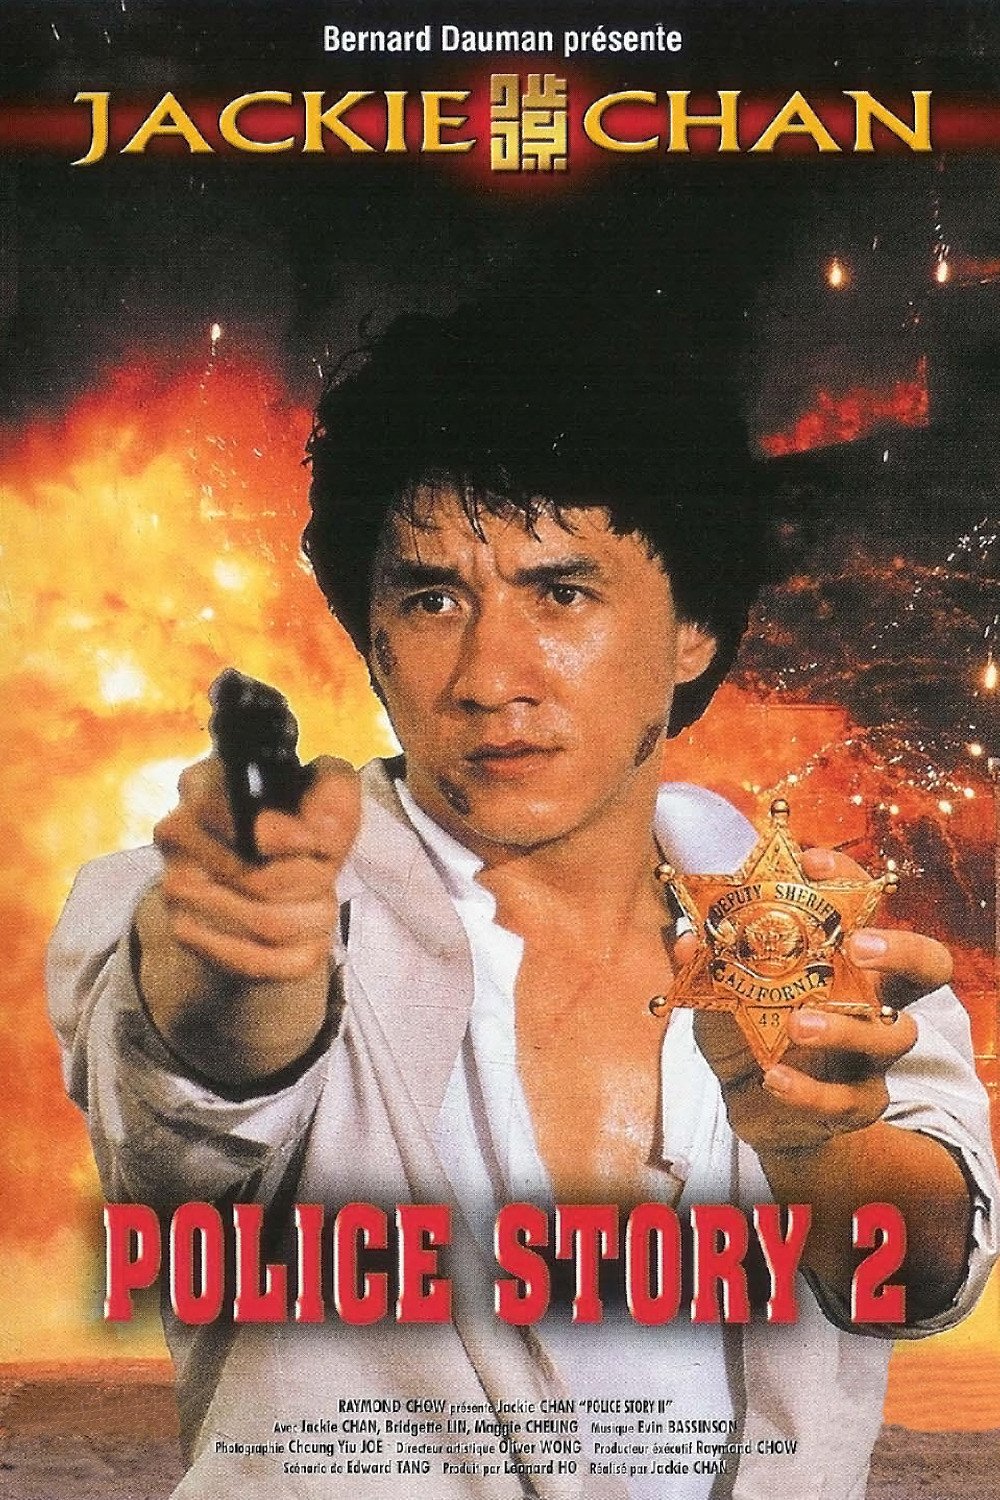 Poster of the movie Police Story 2